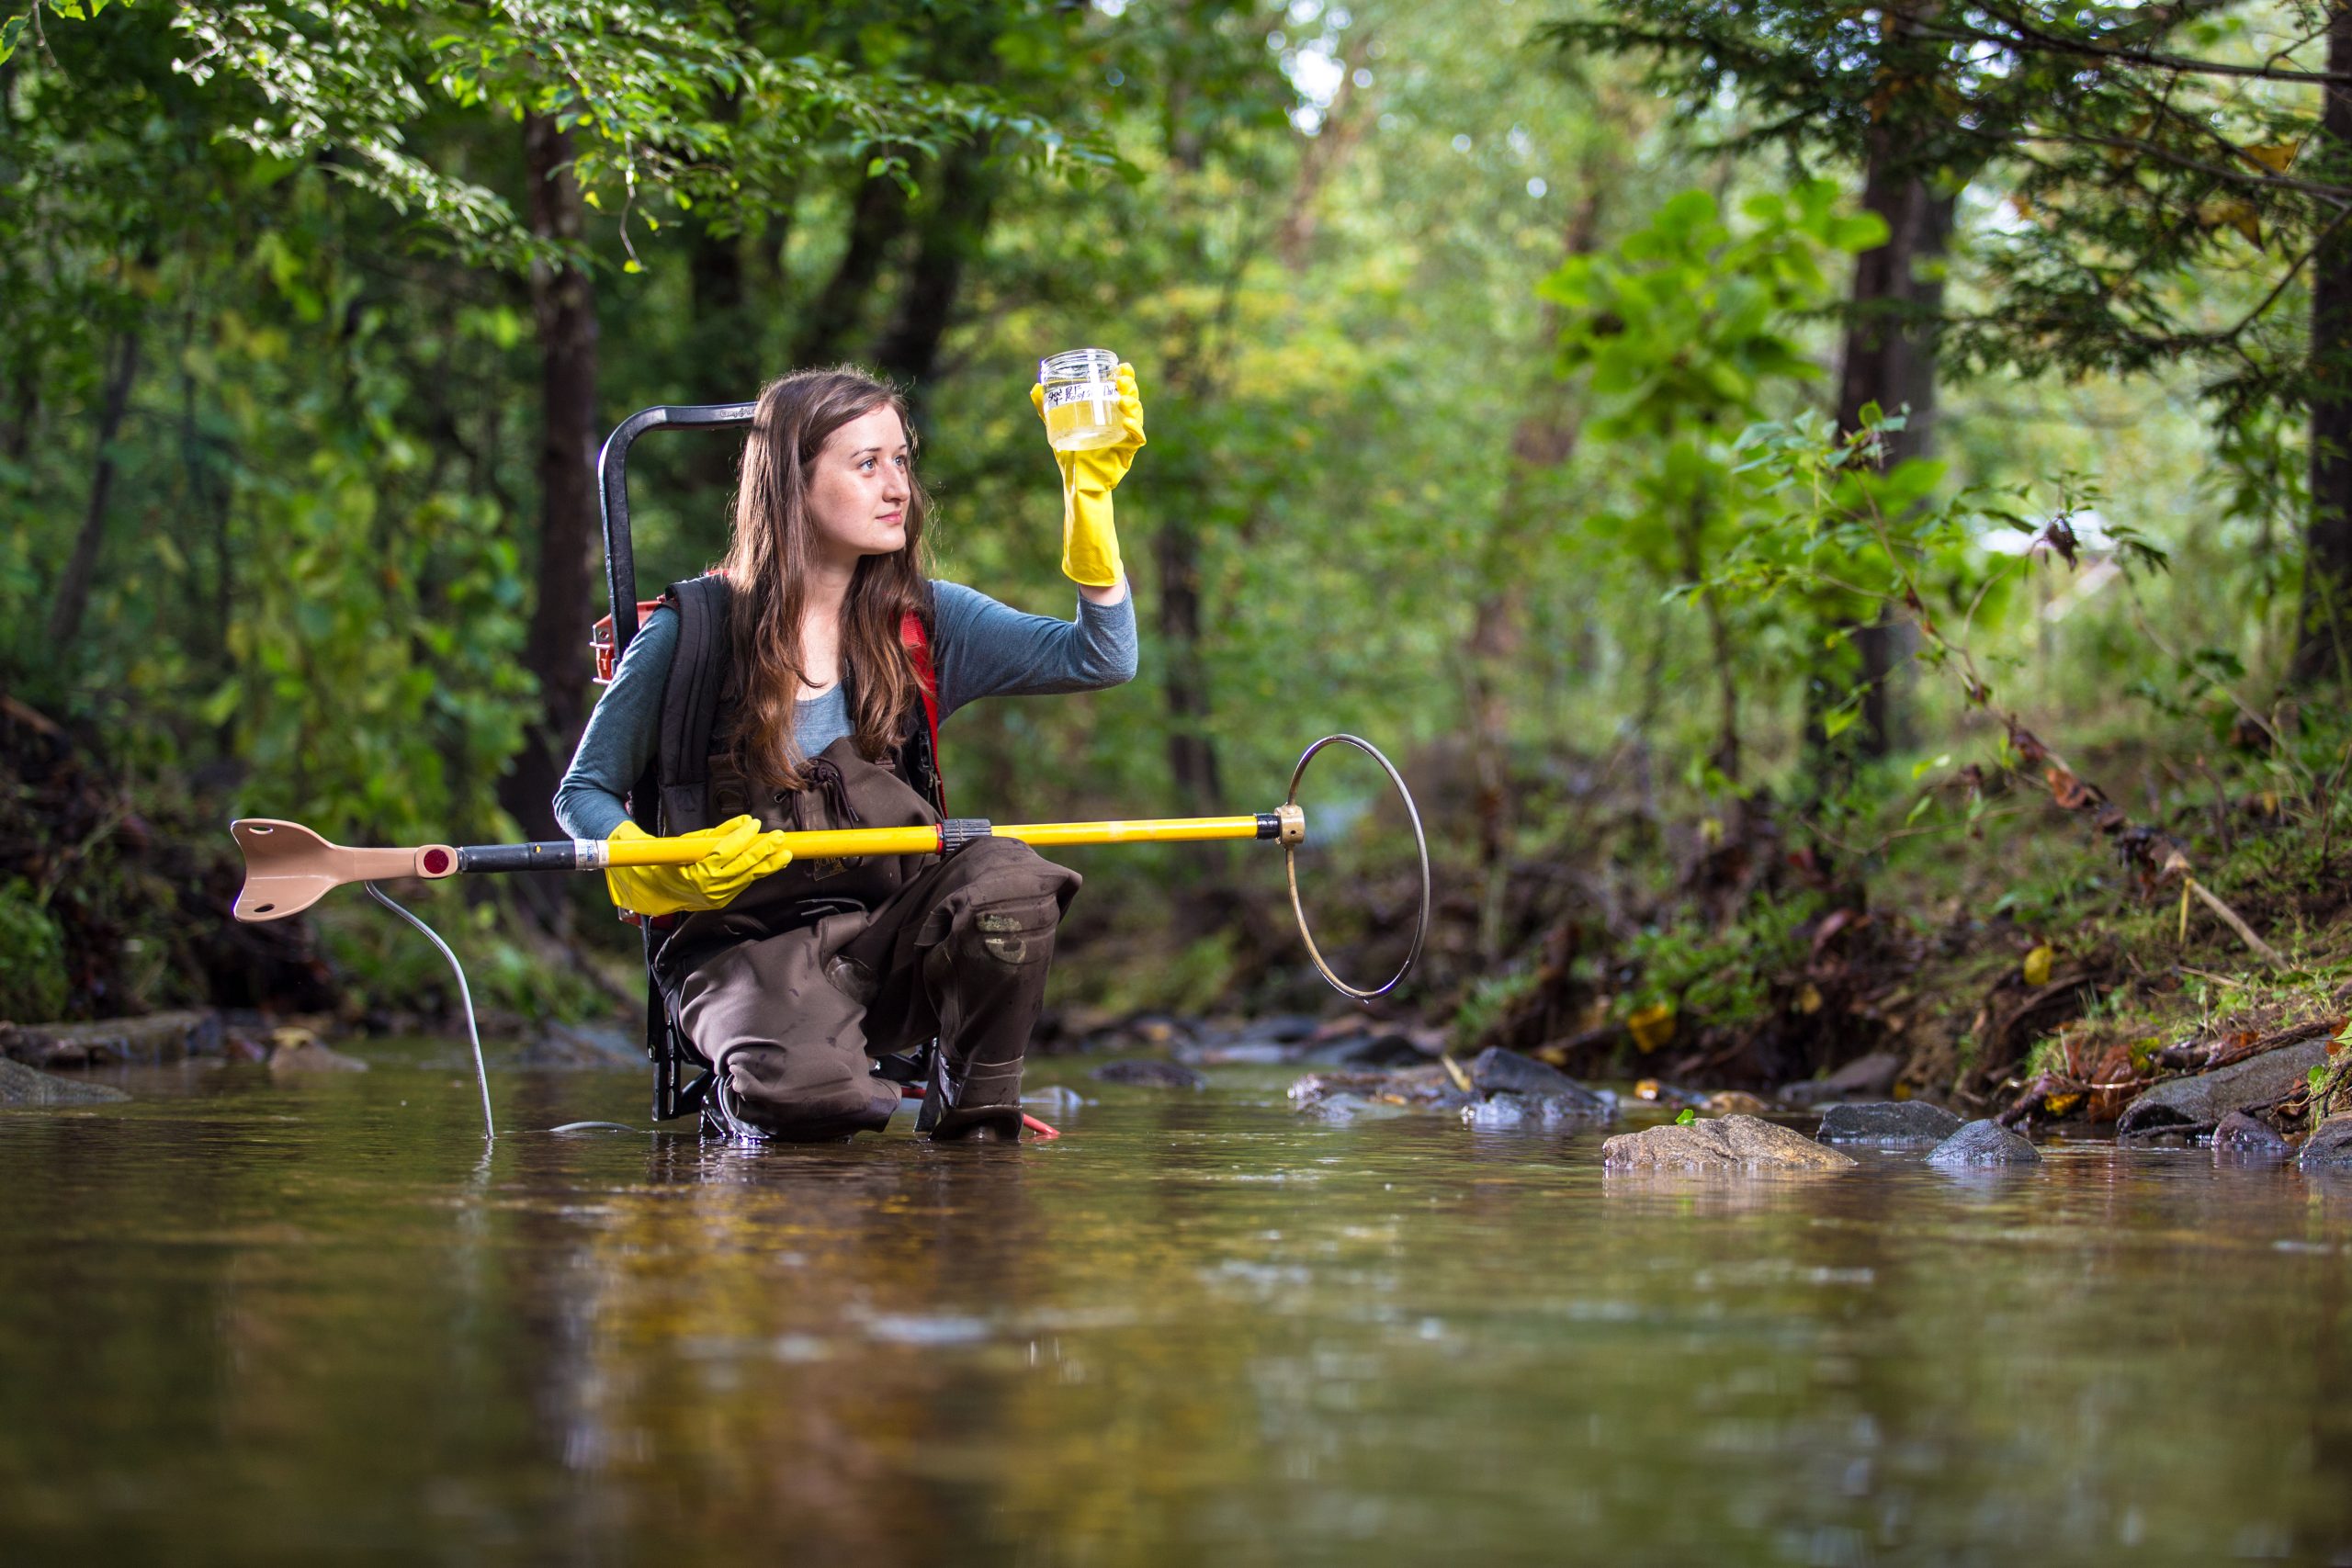 Someome standing in a river with research equipment, examining a water sample